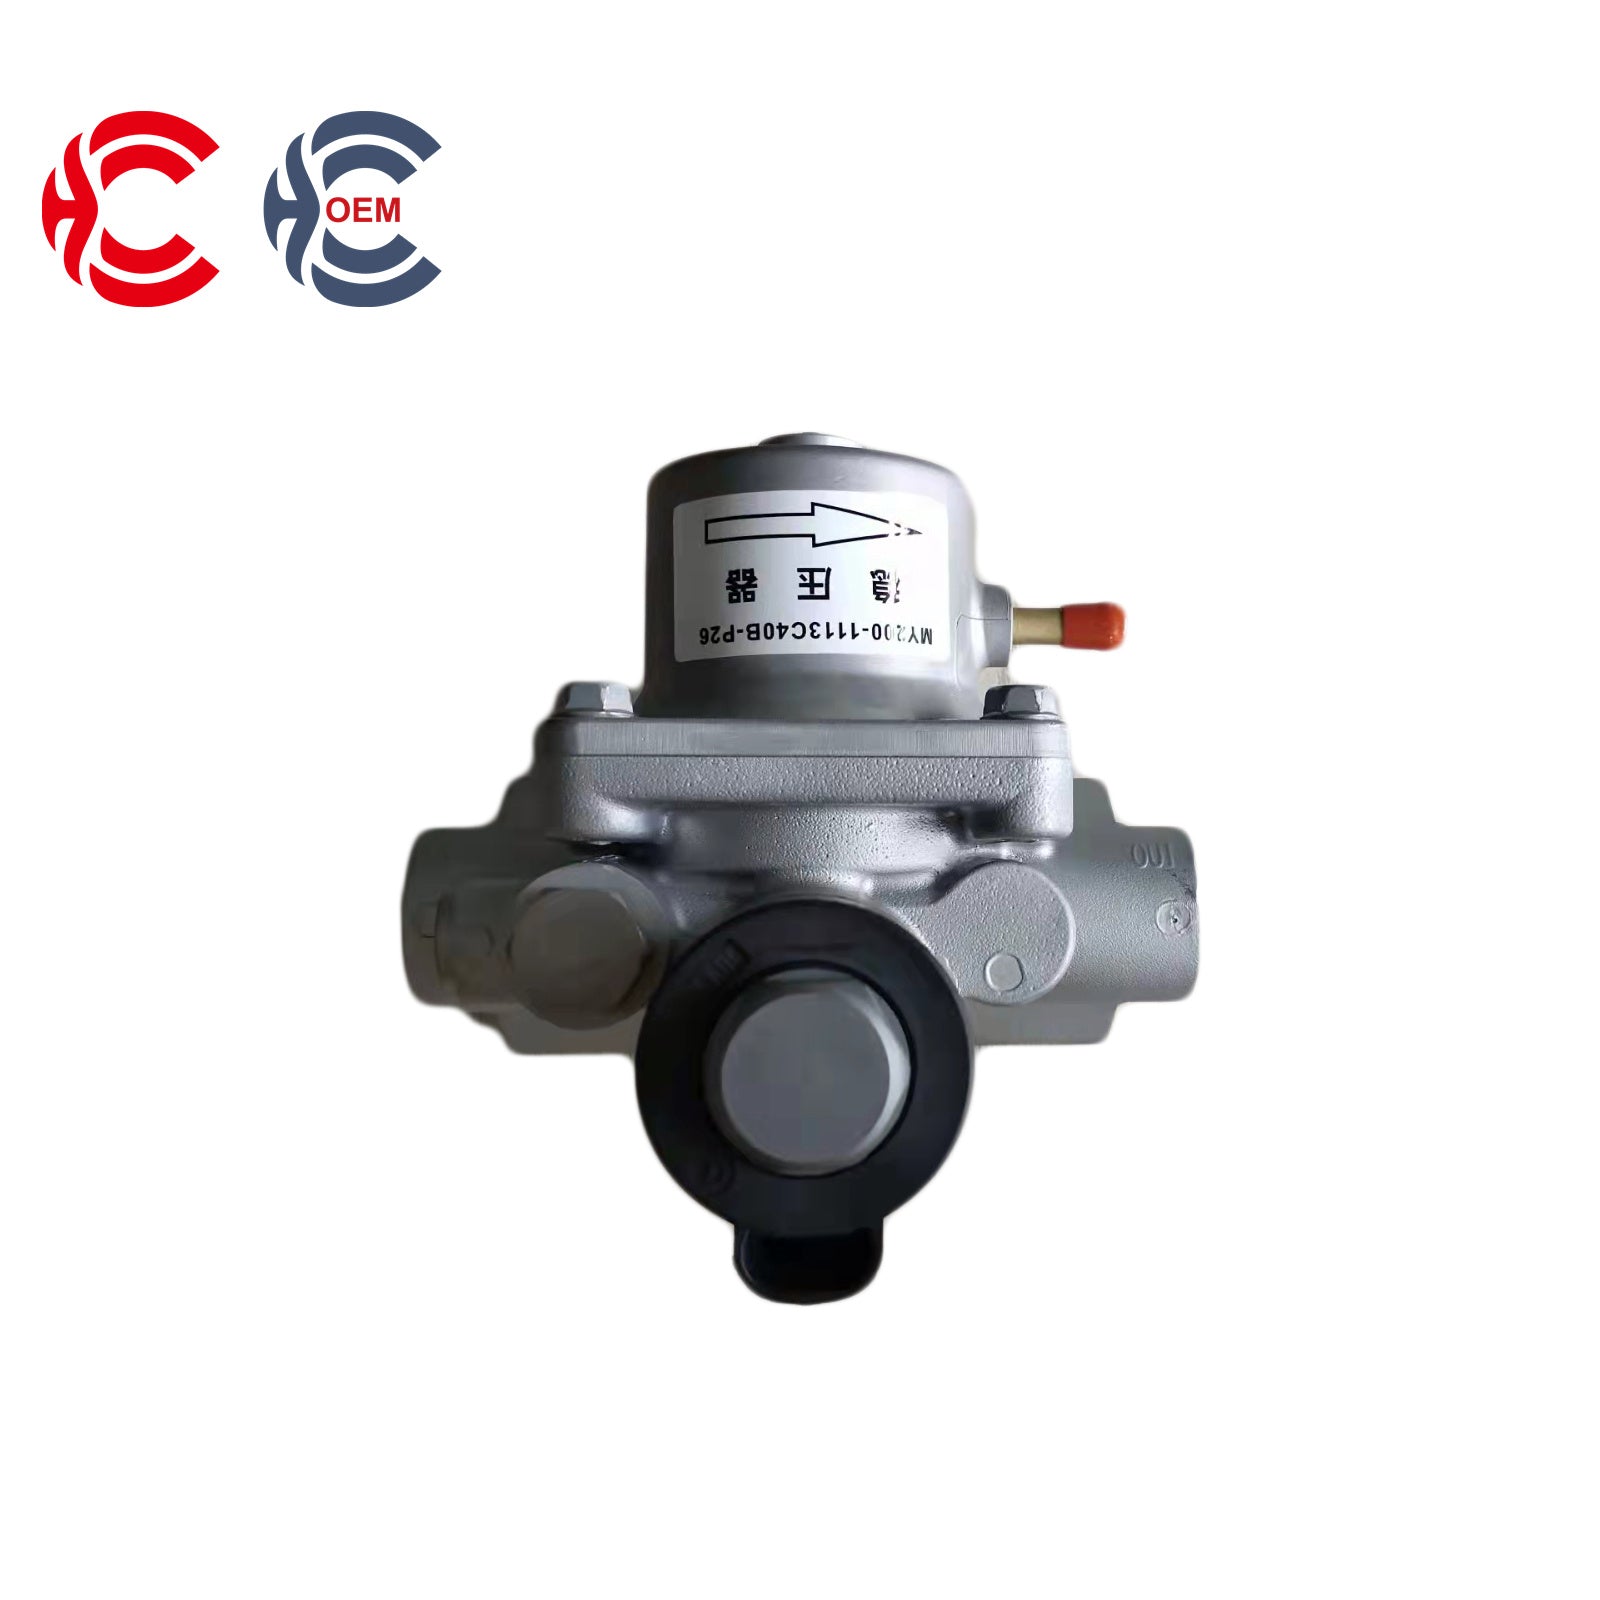 OEM: MY200-1113C40B-P26Material: ABS MetalColor: black silver goldenOrigin: Made in ChinaWeight: 2000gPacking List: 1* Gas Pressurizer More ServiceWe can provide OEM Manufacturing serviceWe can Be your one-step solution for Auto PartsWe can provide technical scheme for you Feel Free to Contact Us, We will get back to you as soon as possible.